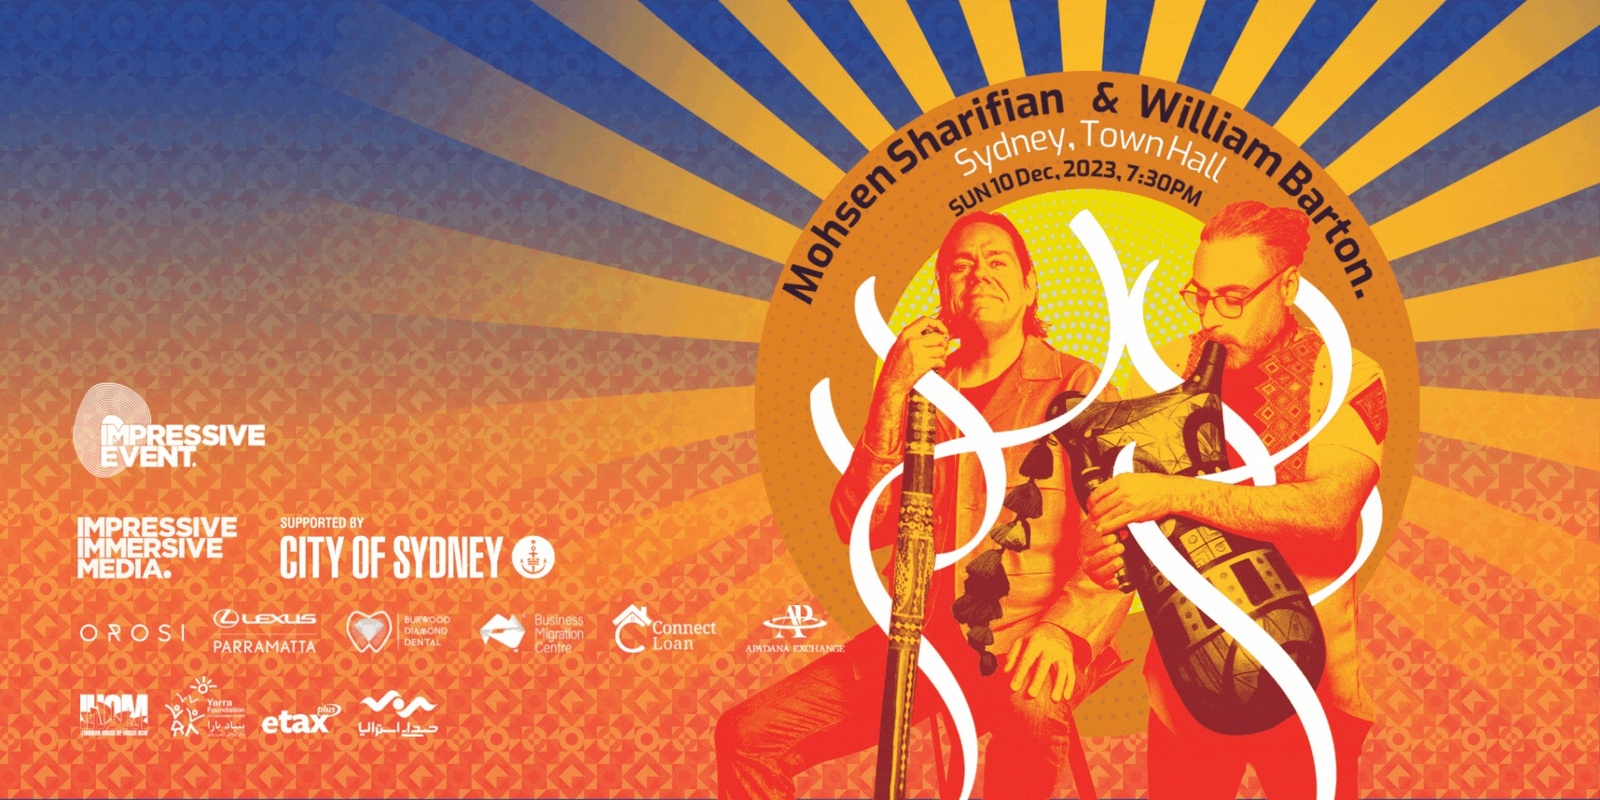 Banner image for From Harbour to Harbour - LIAN Band Concert in Australia